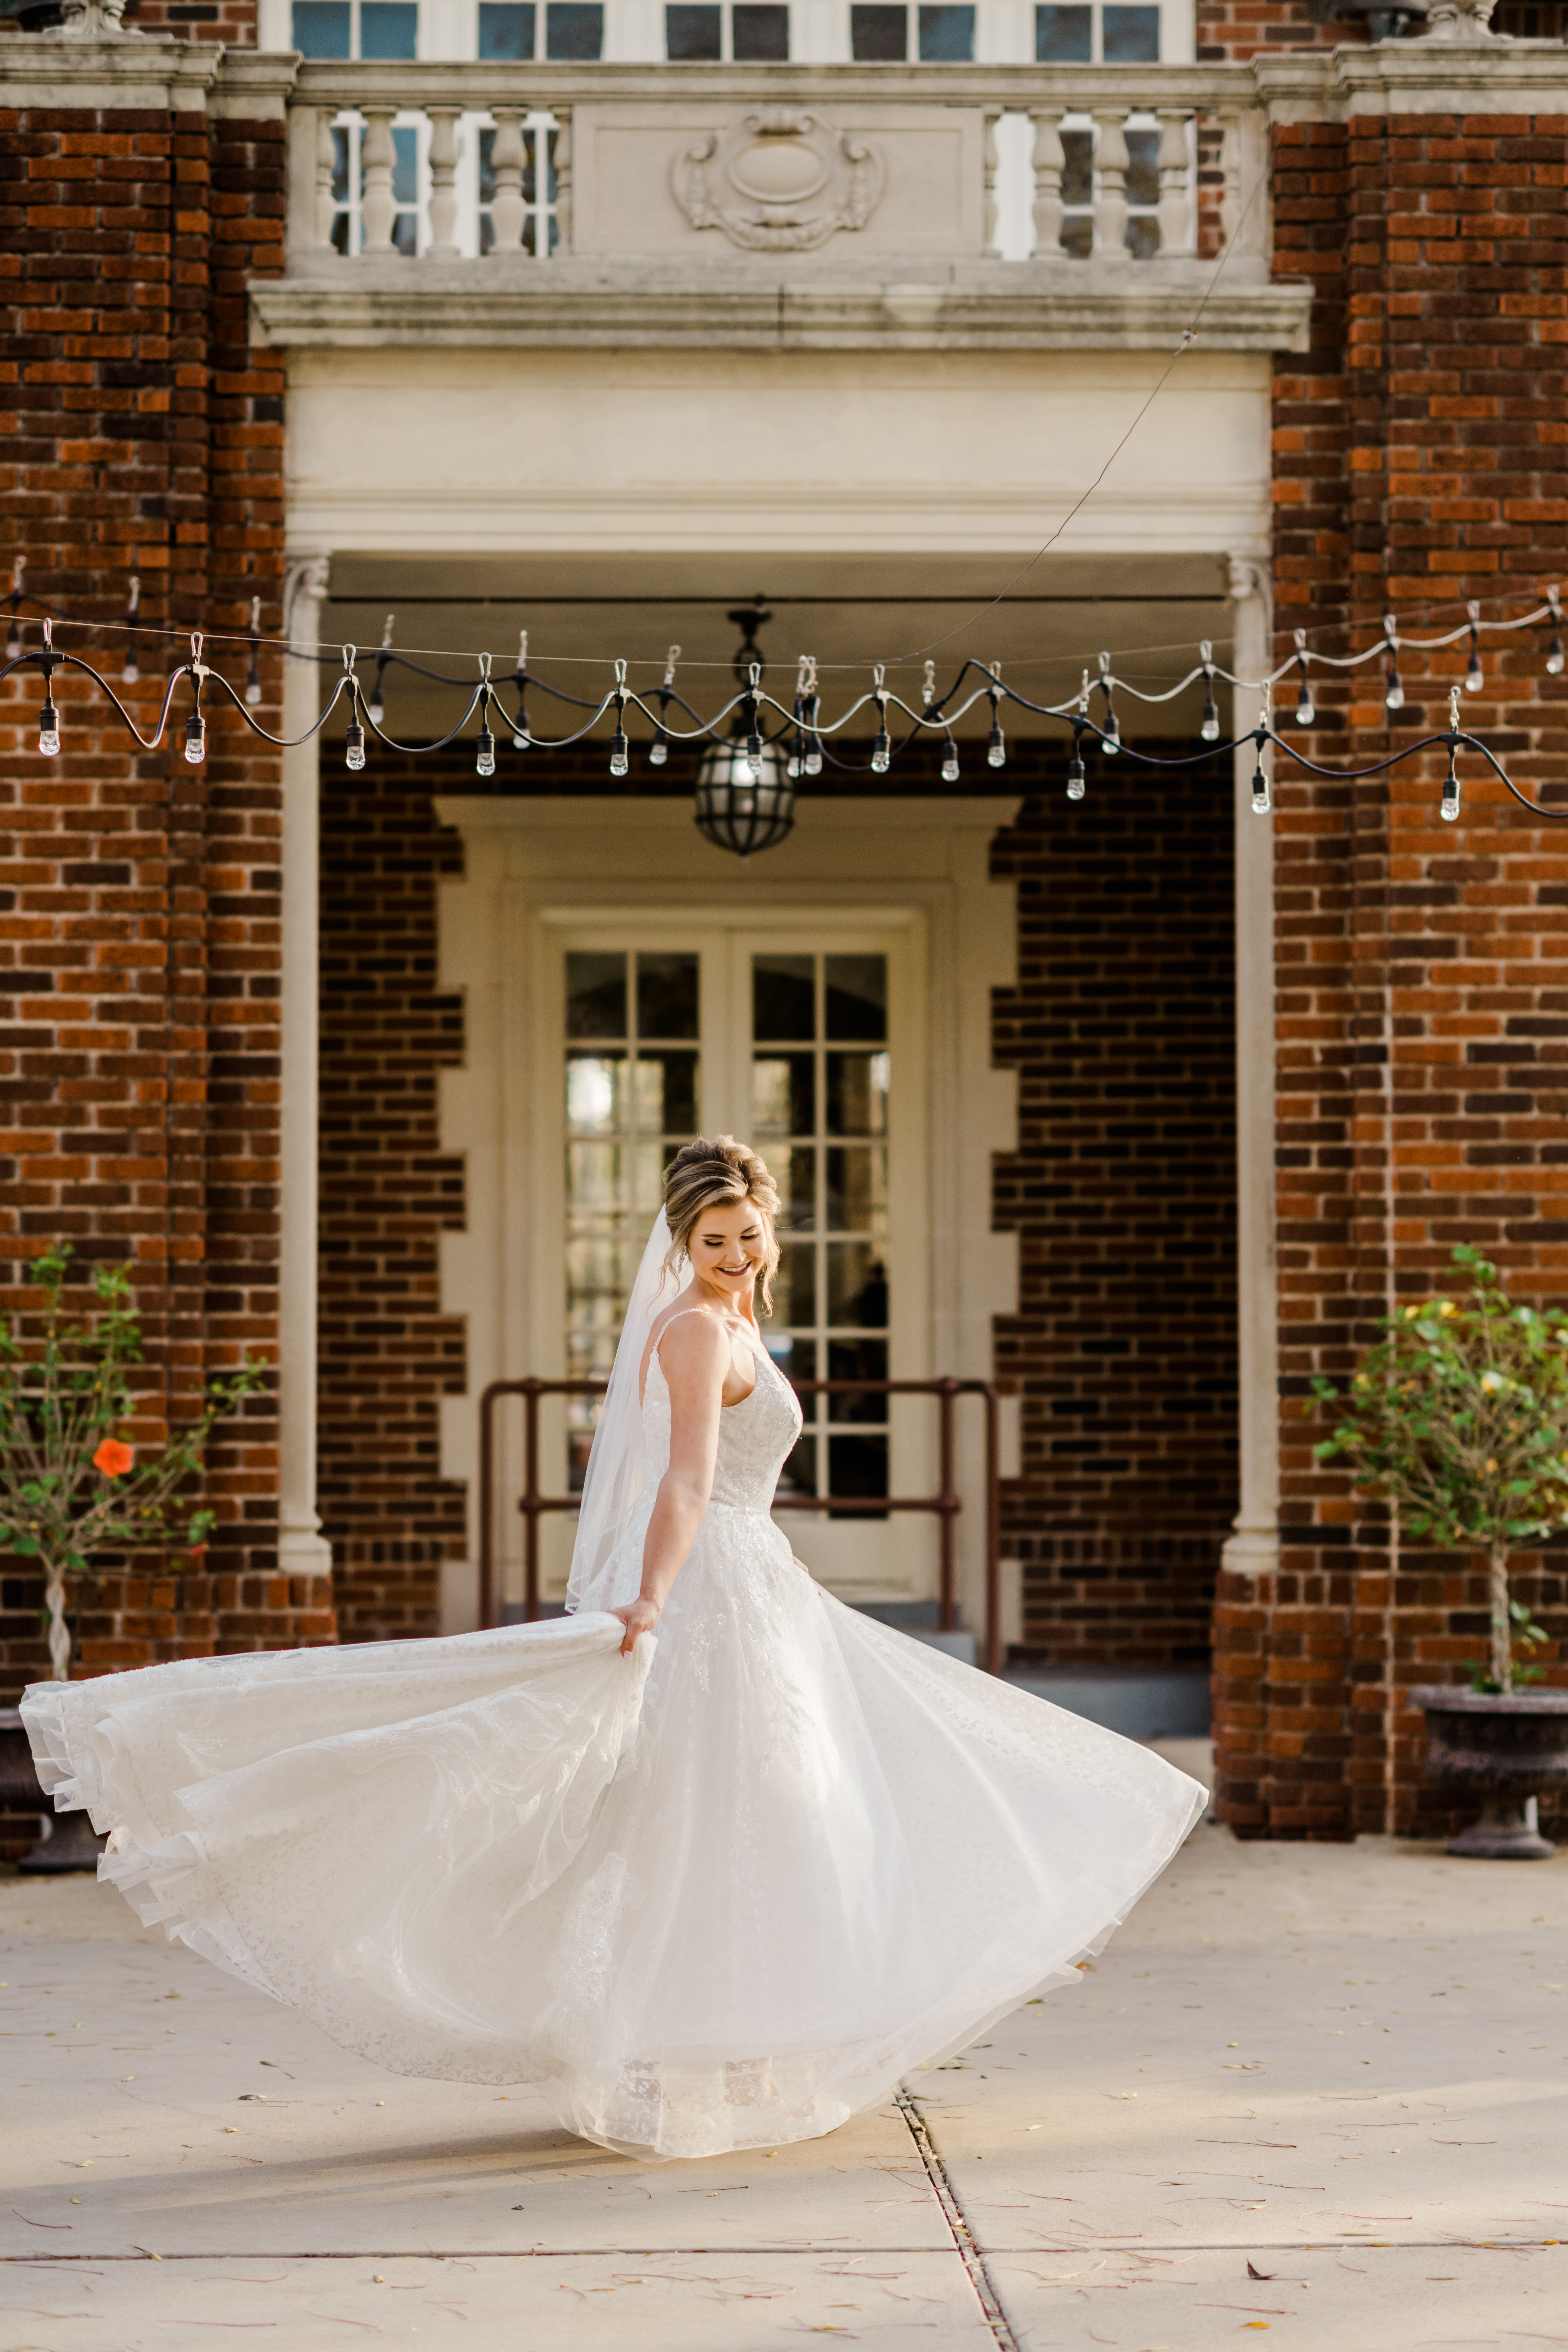 Morgan's Bridal Session at the Astin Mansion in Bryan, Texas with Rachel Driskell Photography